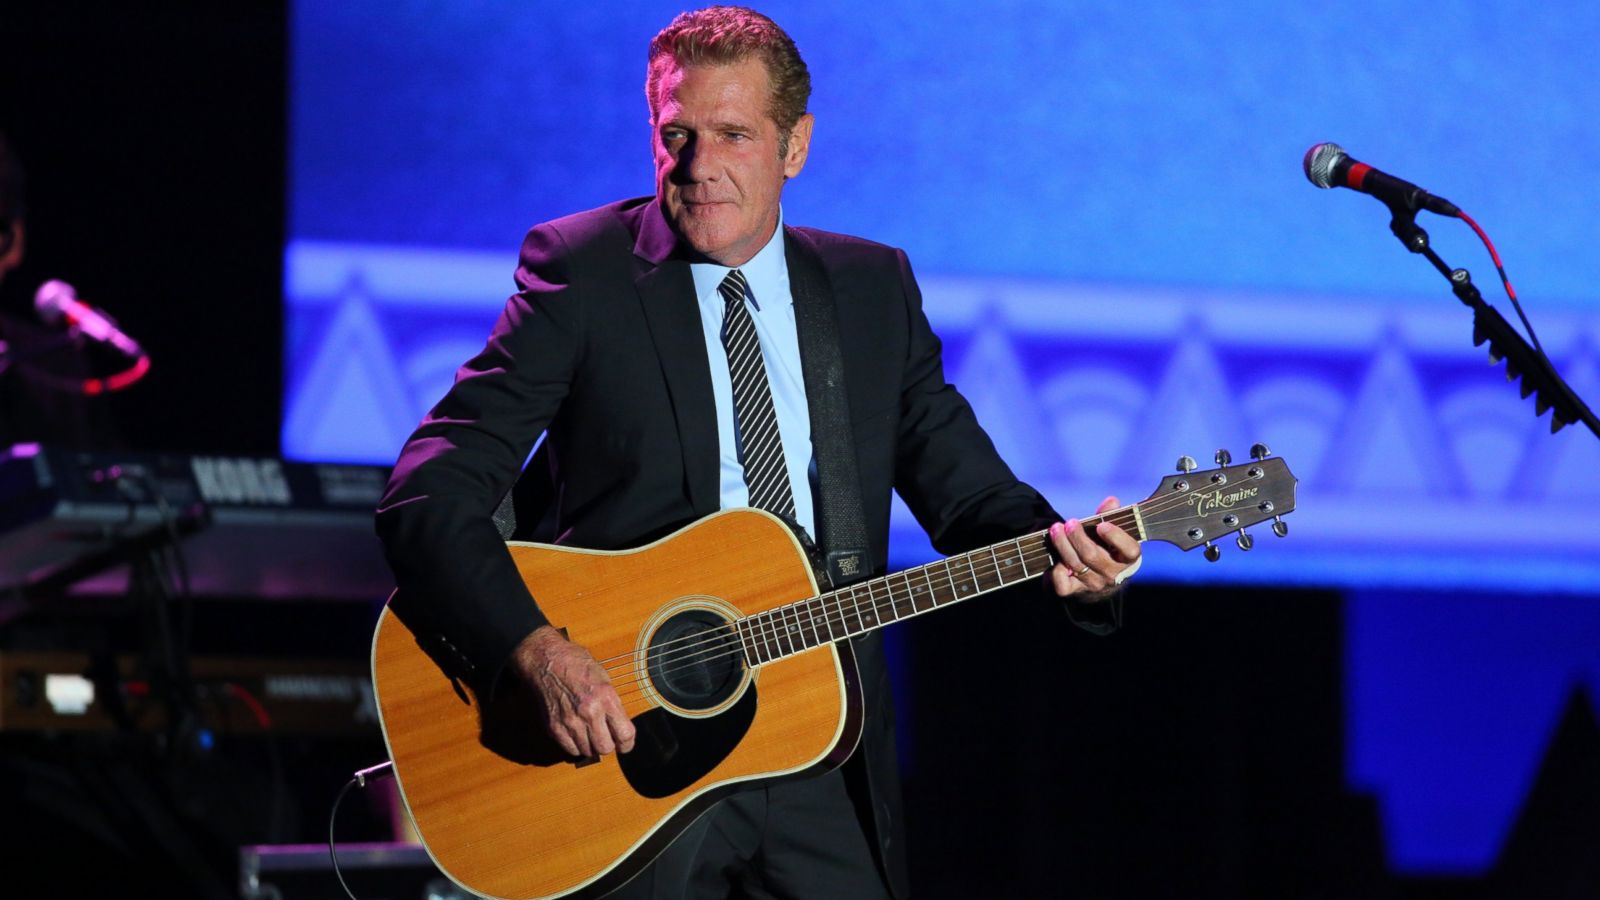 Glenn Frey: The Eagles rocker who took it to the limit, The Independent